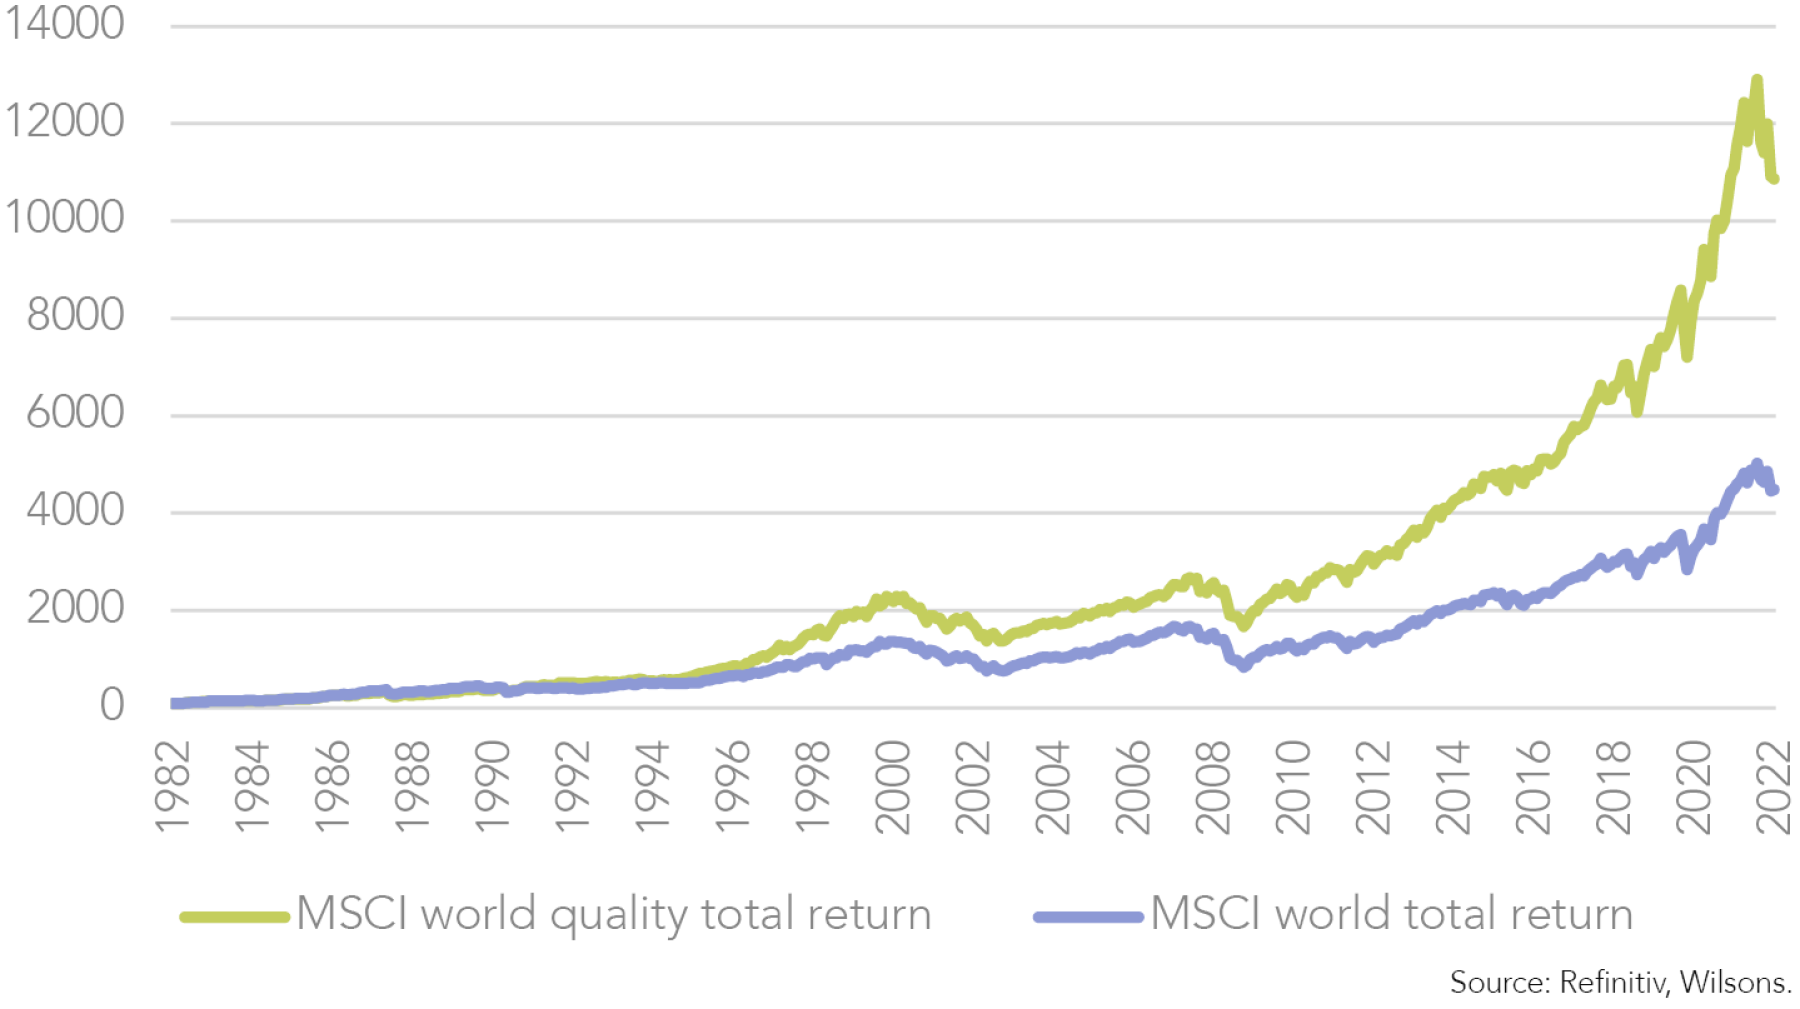 Figure 4: Quality has outperformed over the long run